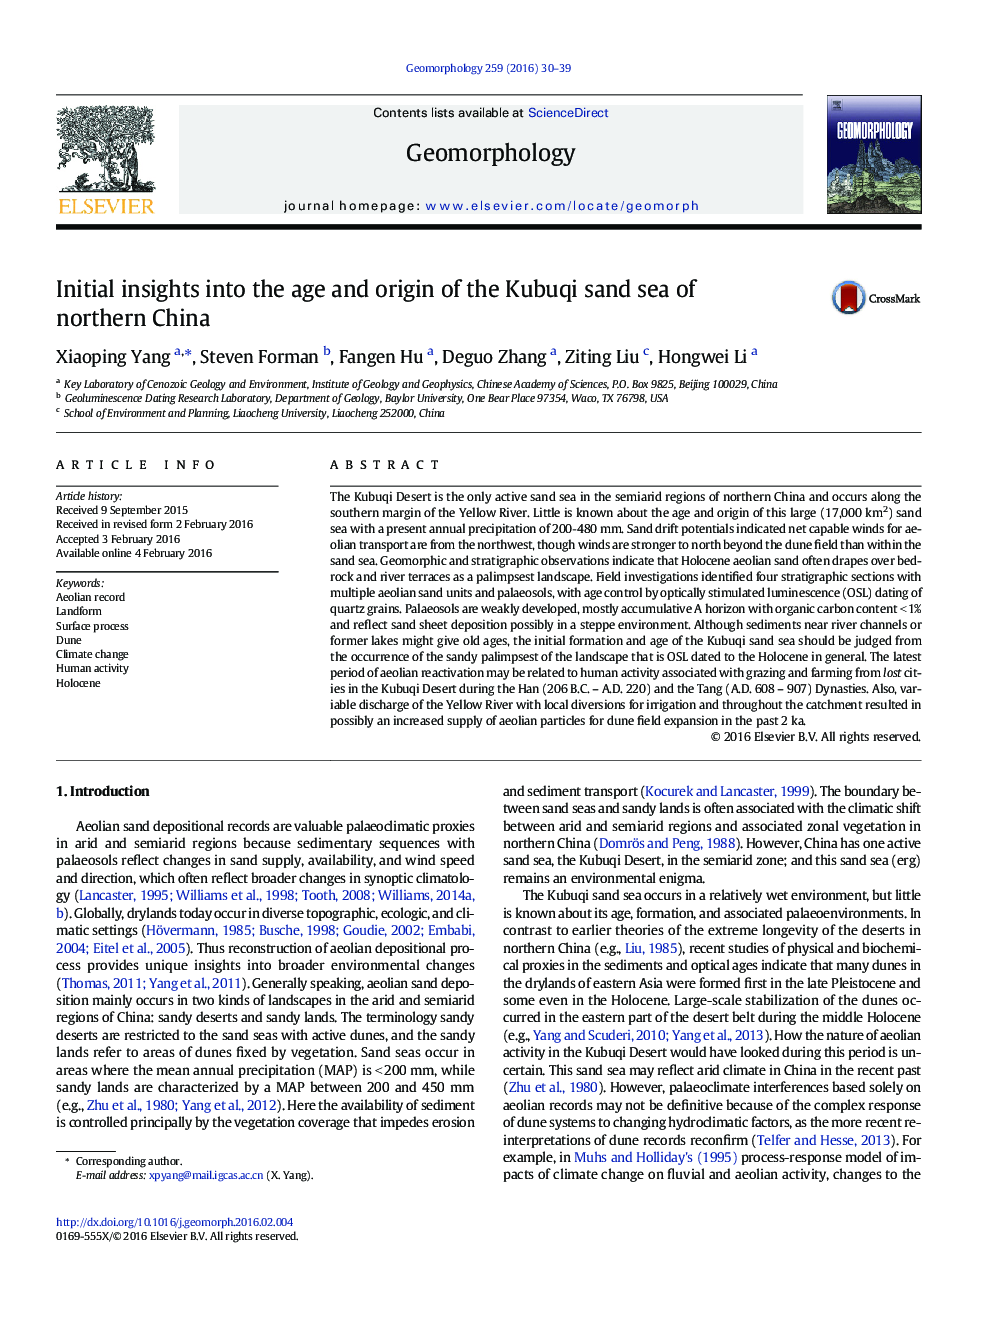 Initial insights into the age and origin of the Kubuqi sand sea of northern China